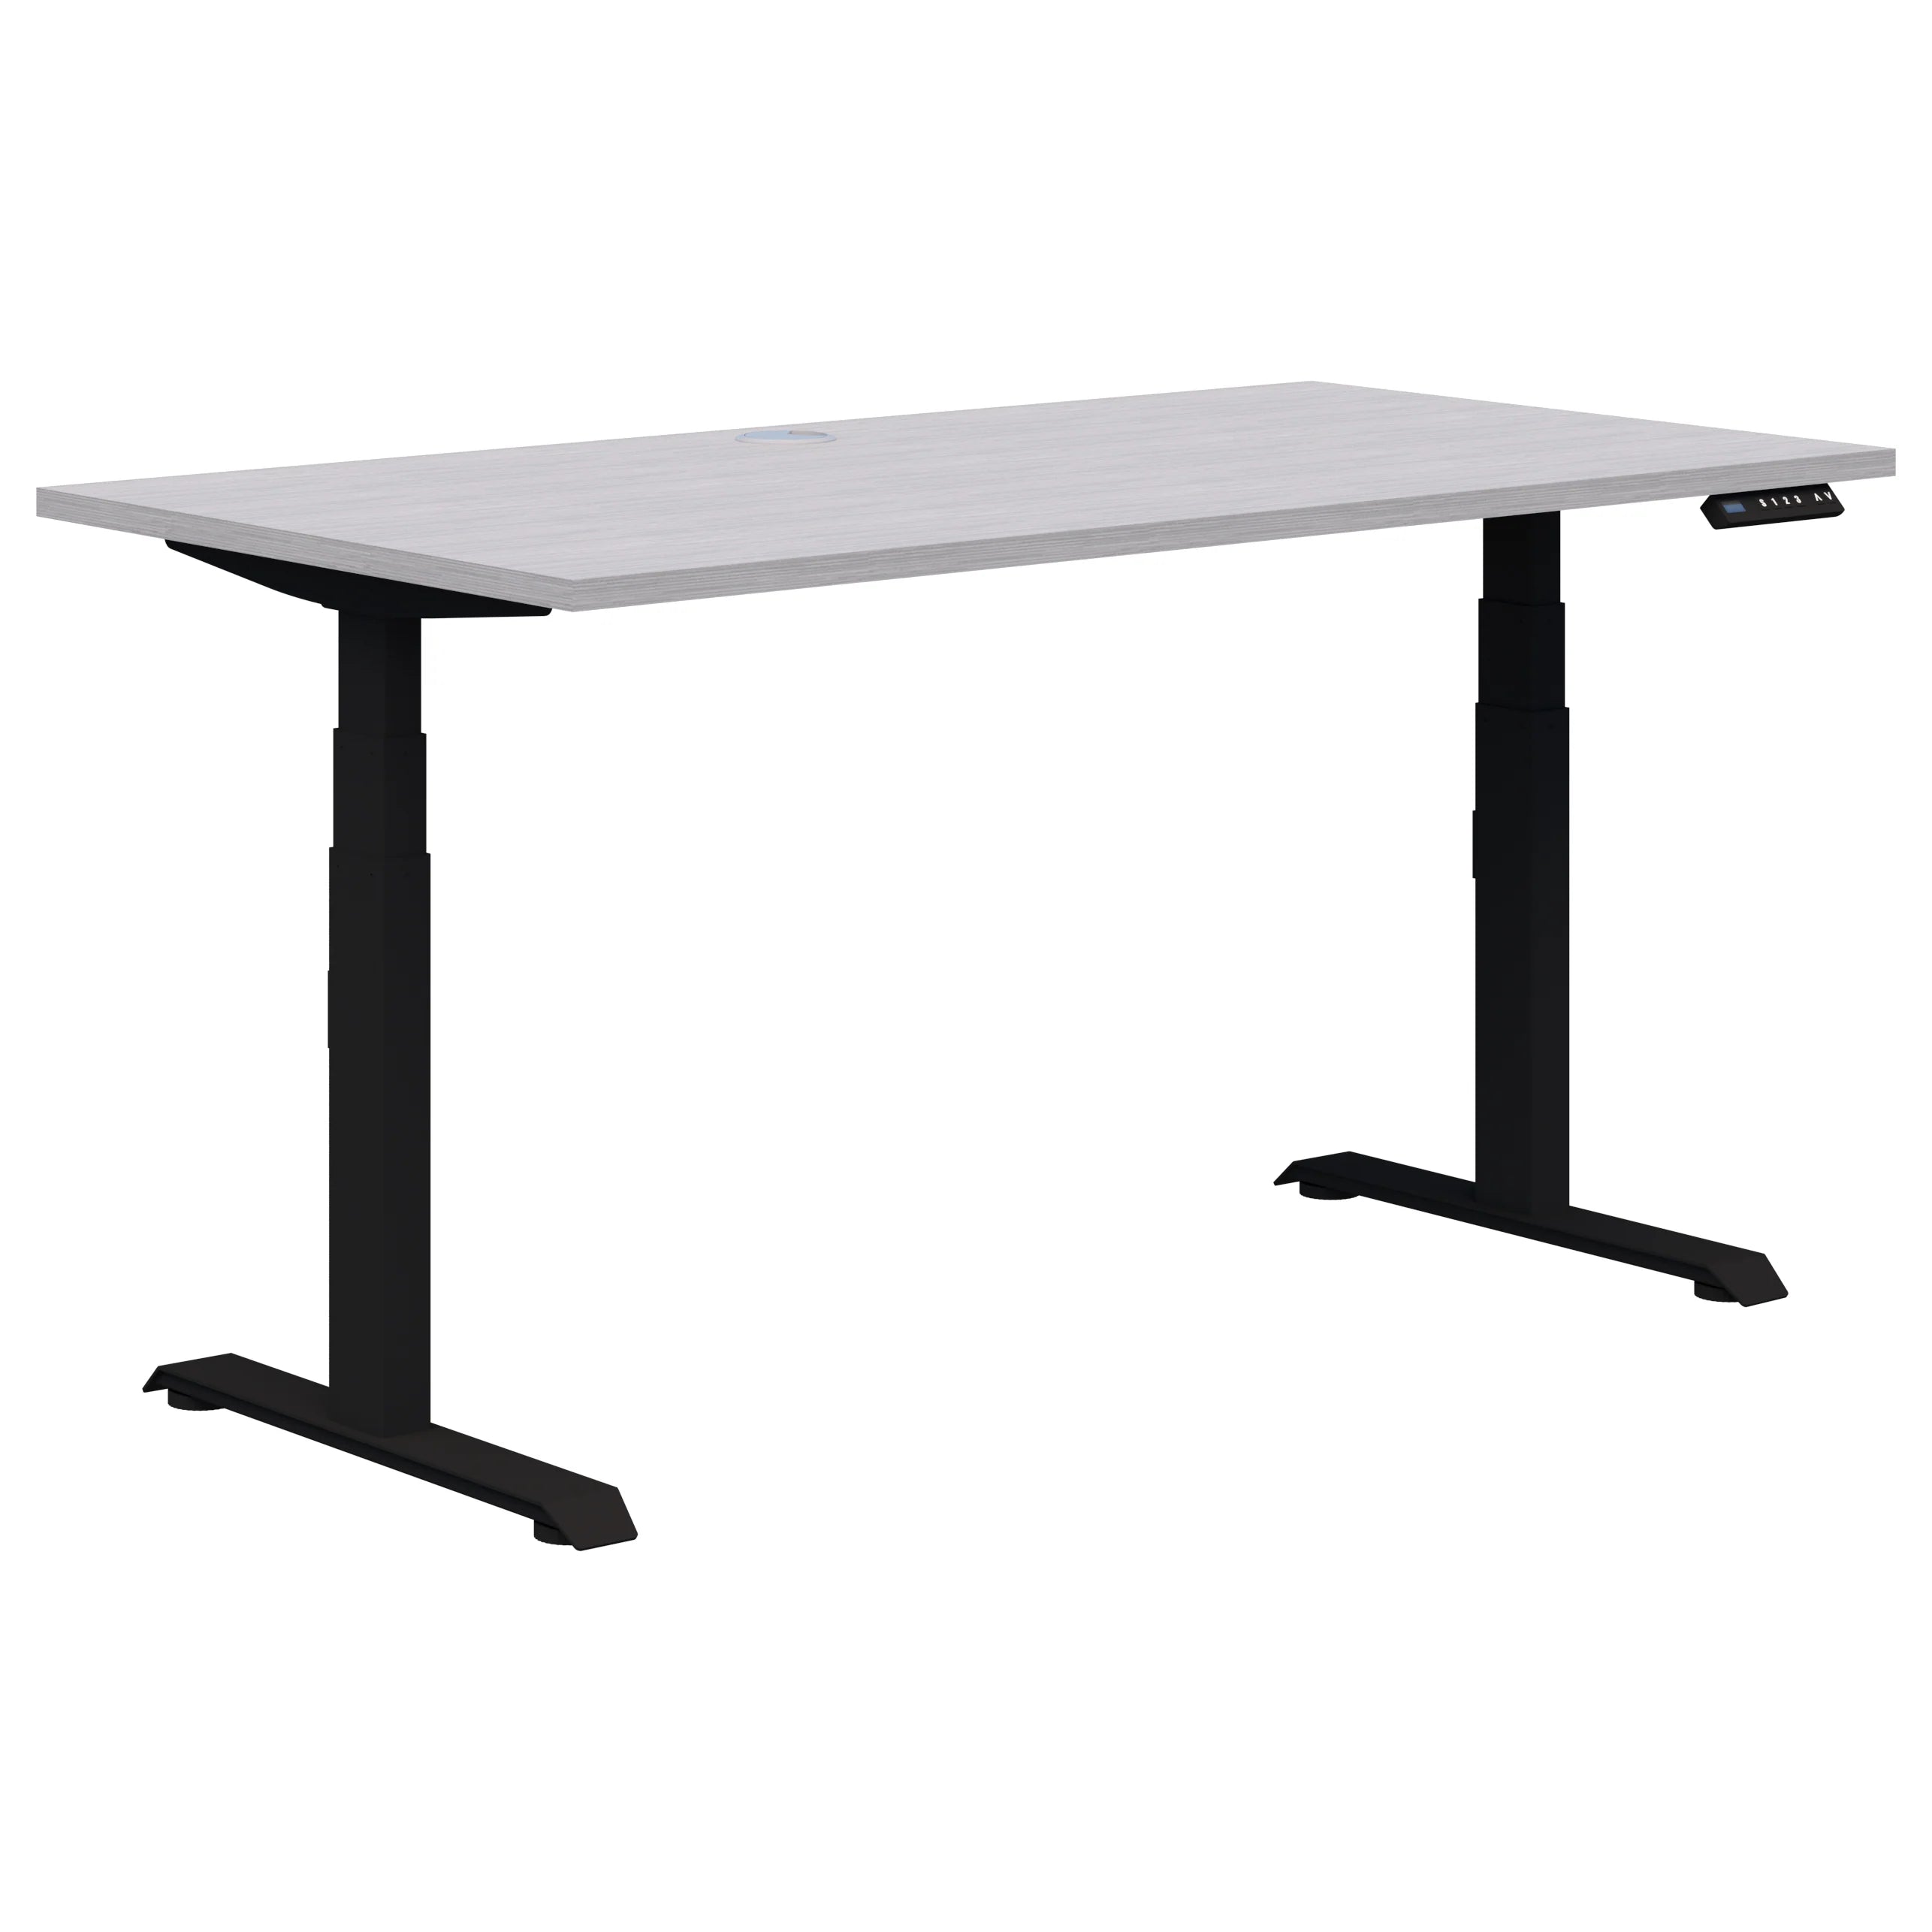 Summit electric height adjustable office desk with black frame and silver strata top.